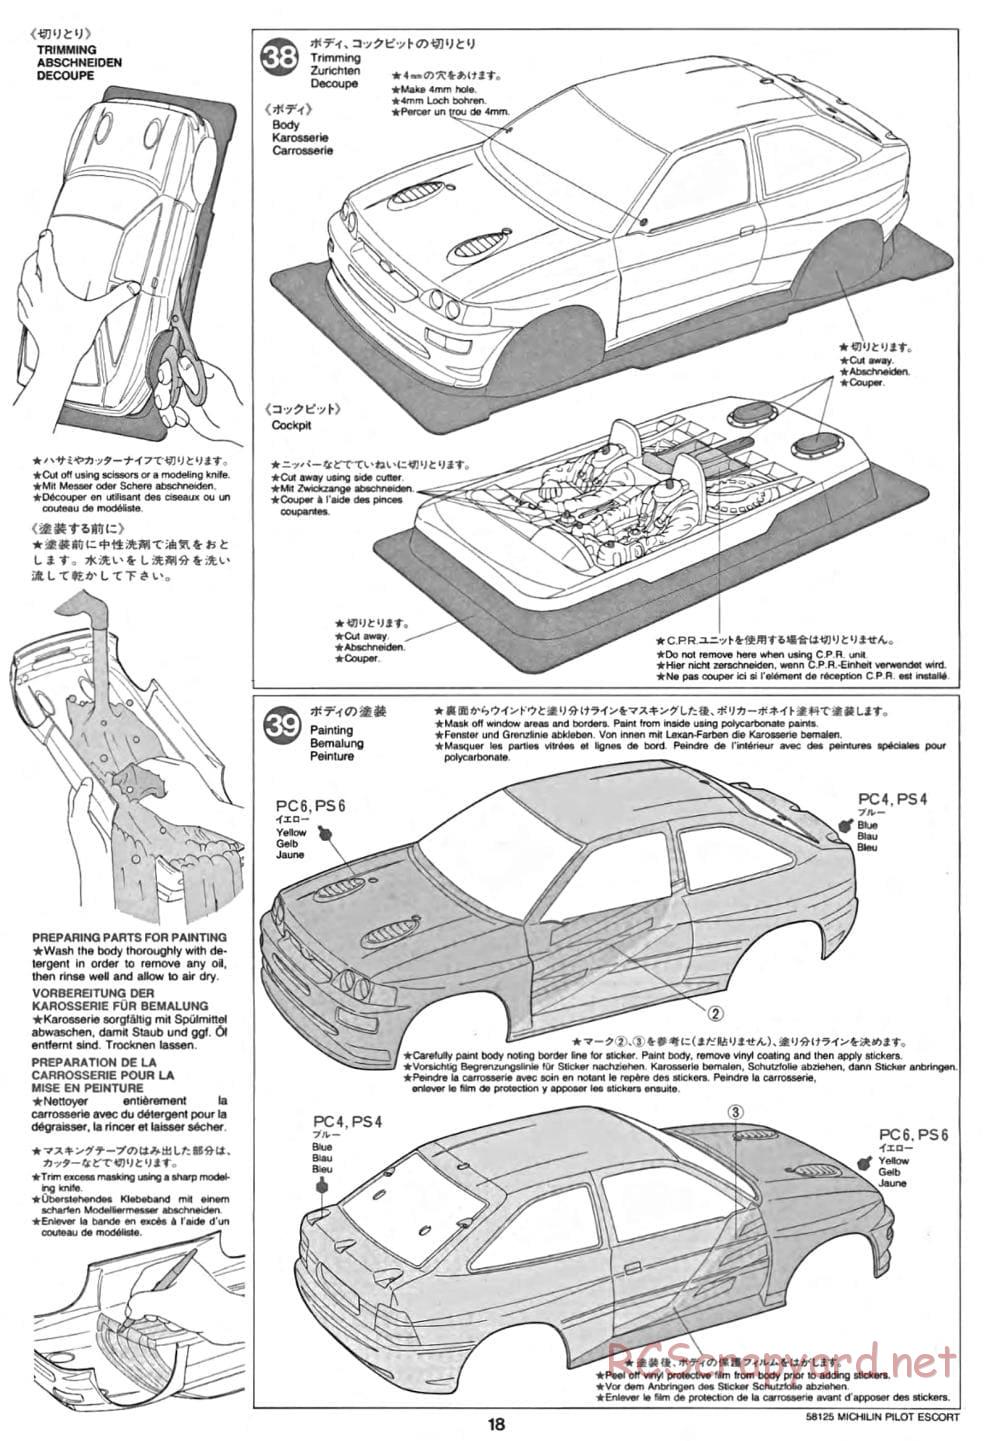 Tamiya - Michelin Pilot Ford Escort RS Cosworth - TA-01 Chassis - Manual - Page 18